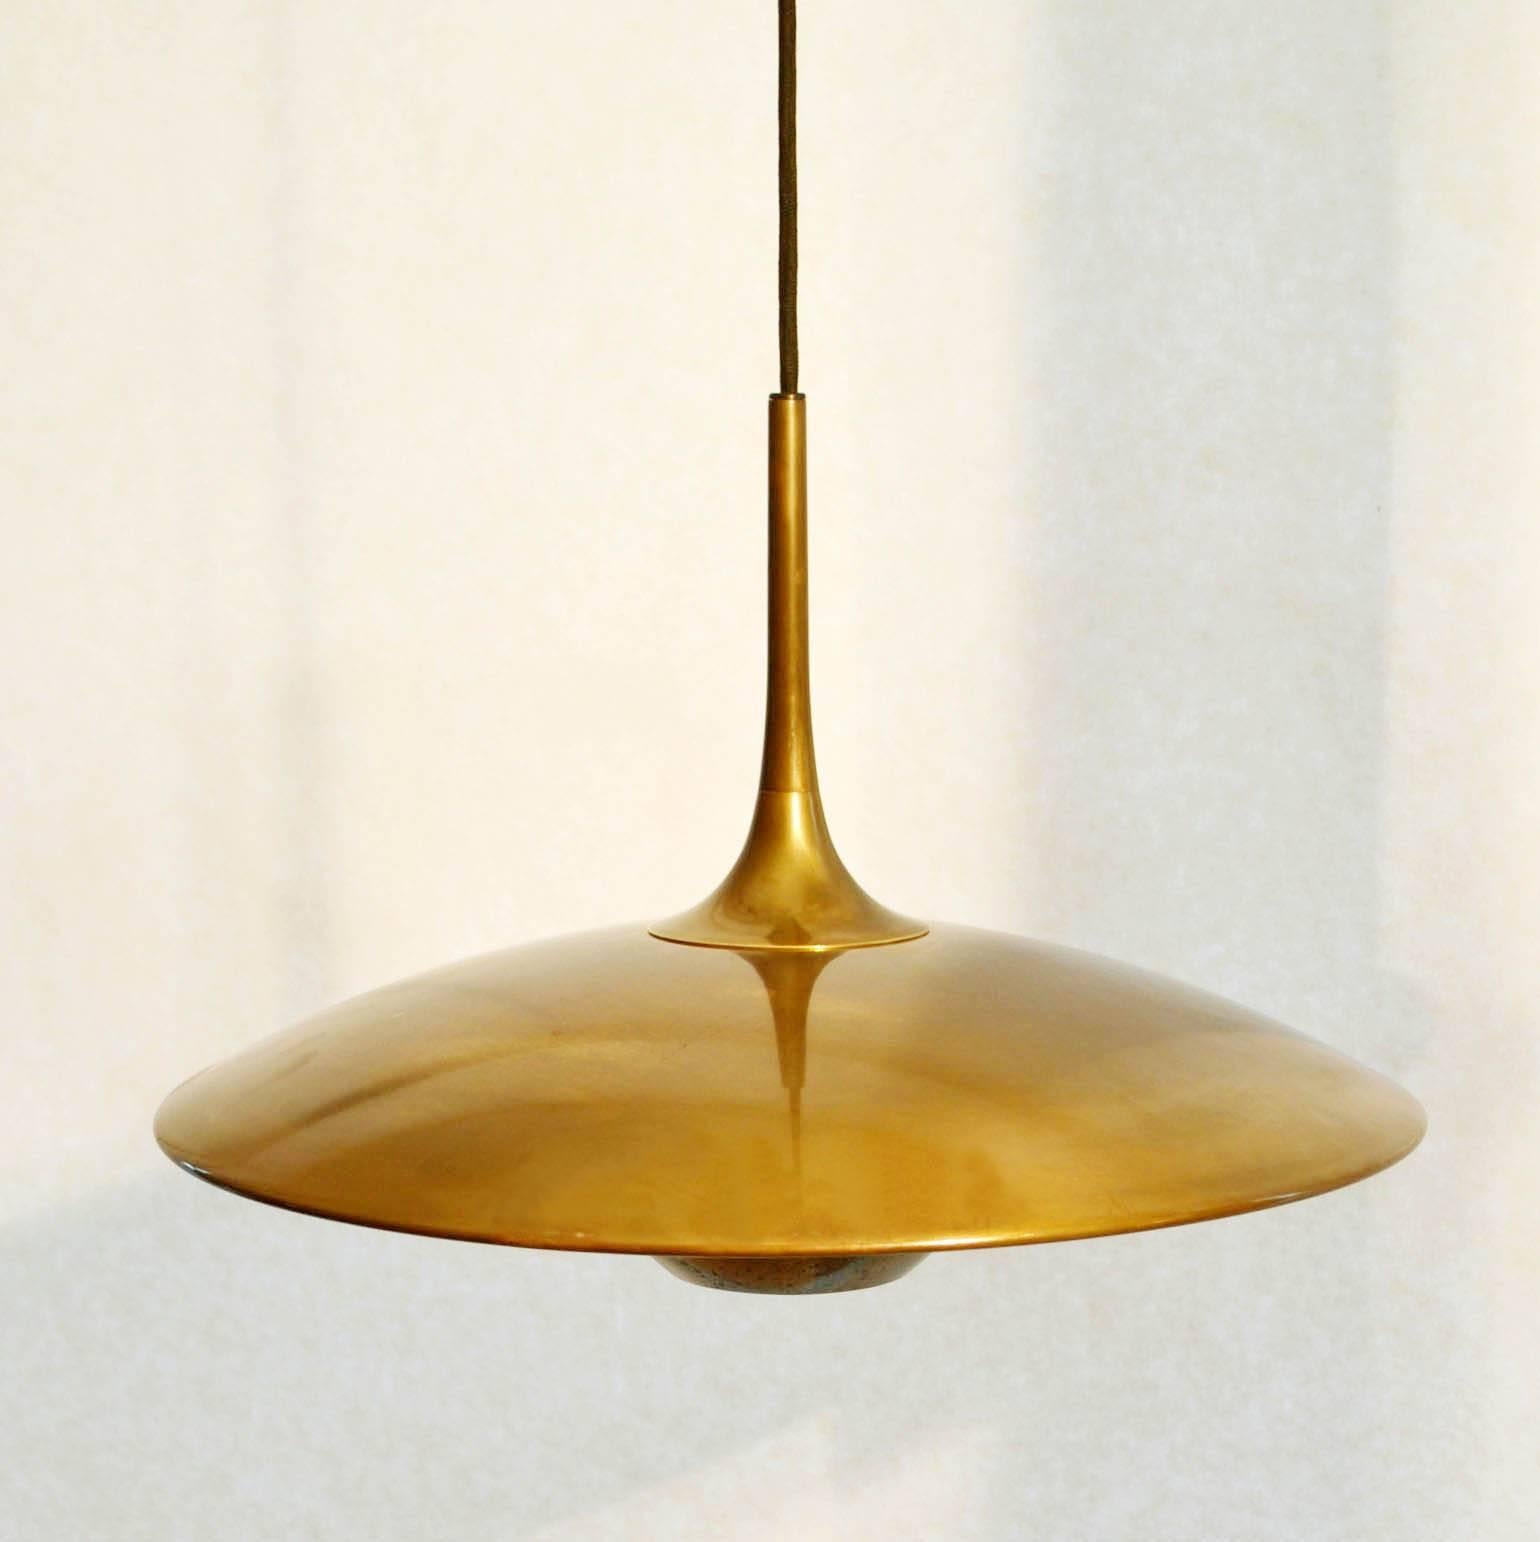 Late 20th Century Double Counterbalance Lamps Onos 40 in Brass by Florian Schulz, 1970s